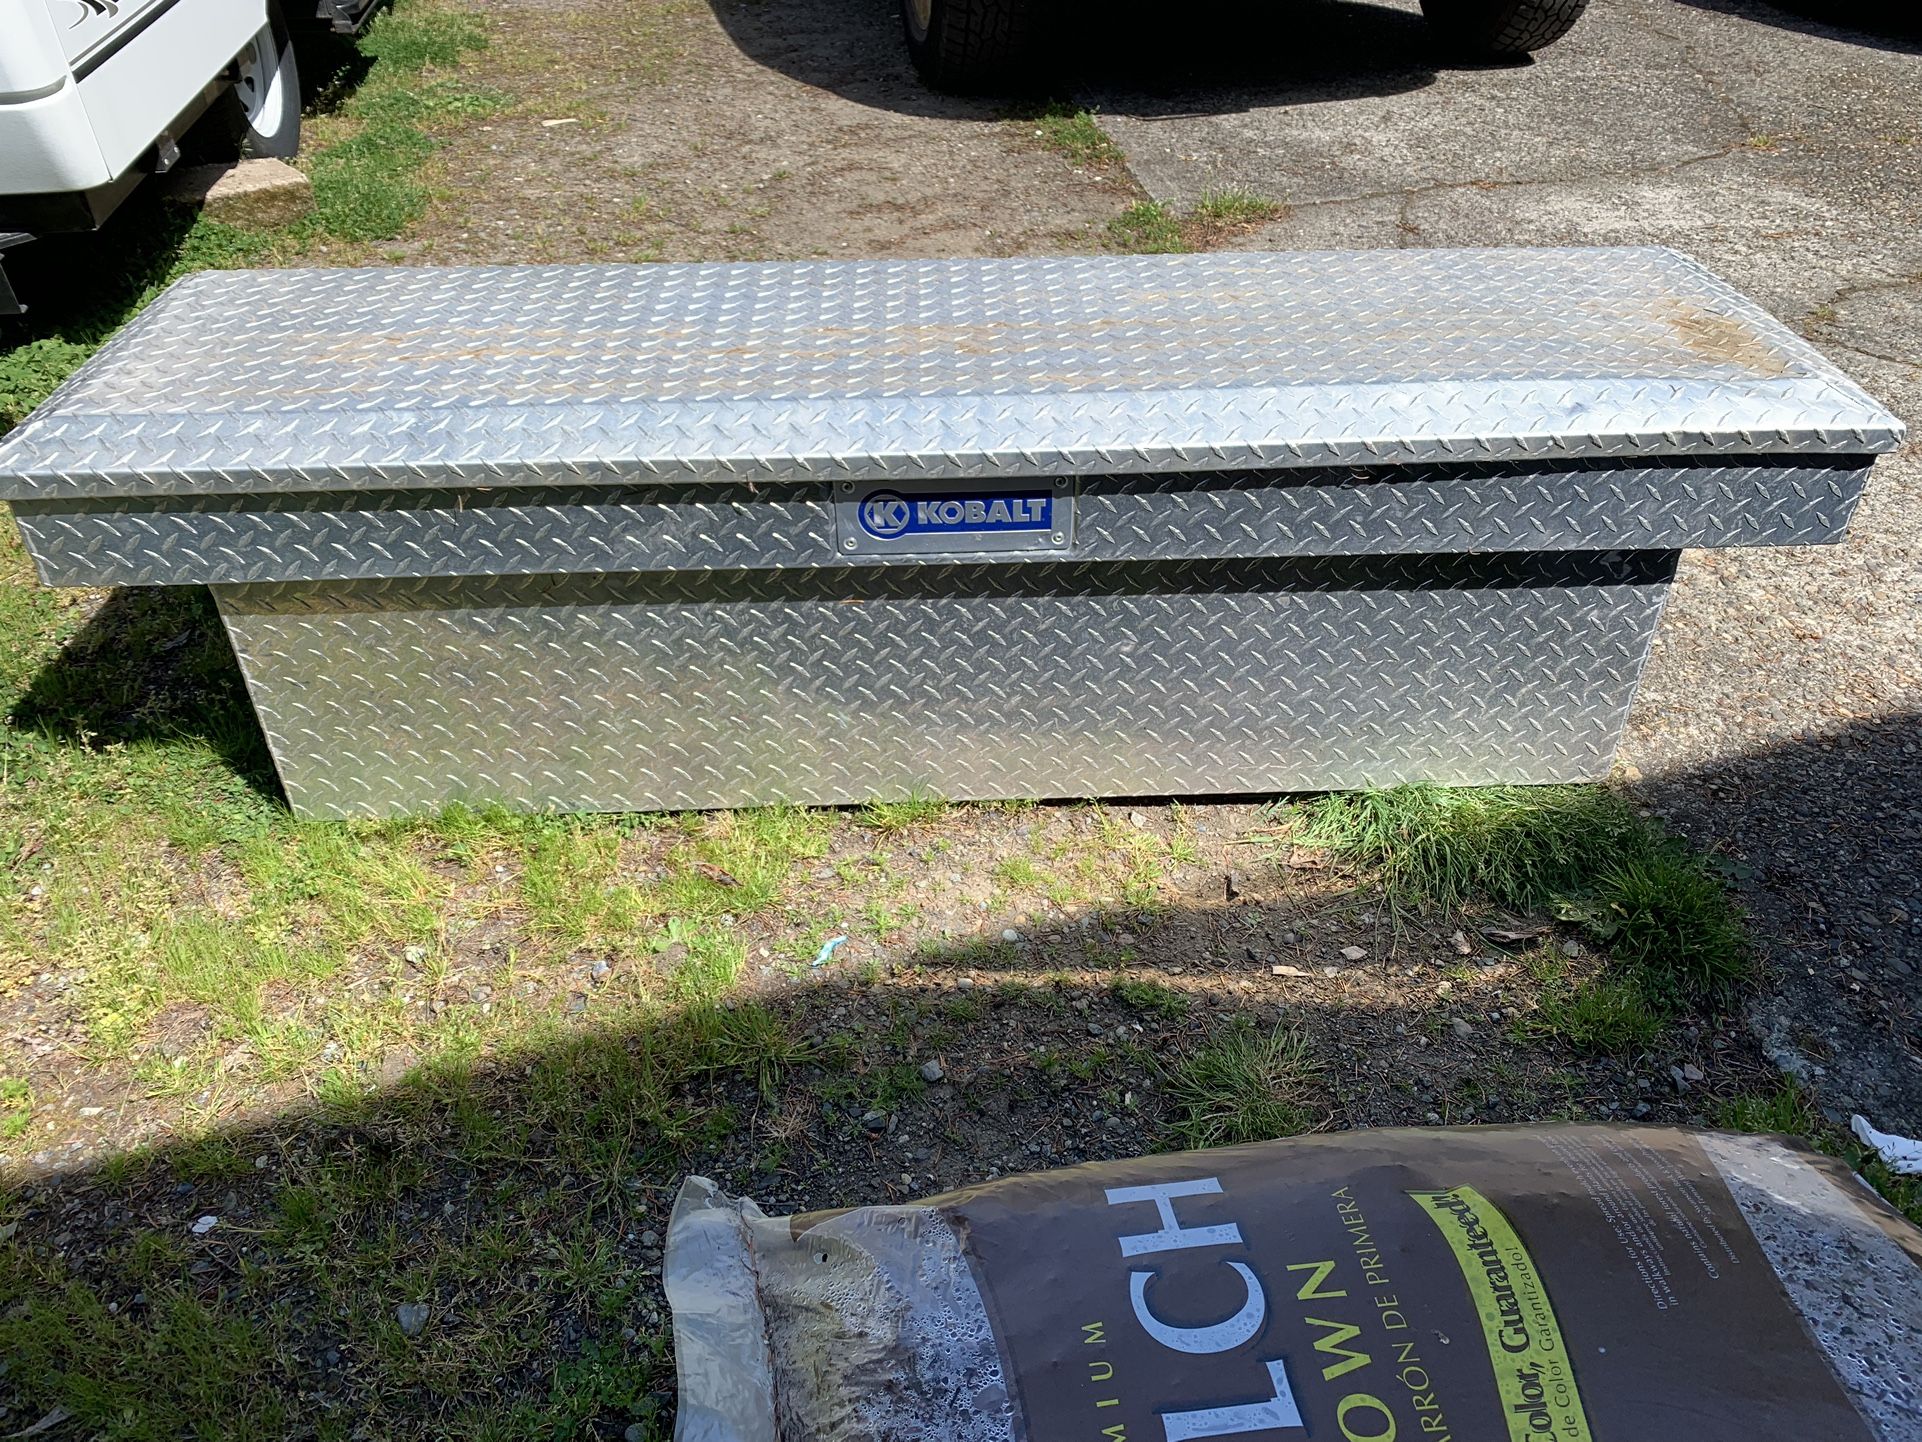 Kobalt 70-in x 20-in Silver Aluminum Crossover Full Size Bed Truck Tool Box